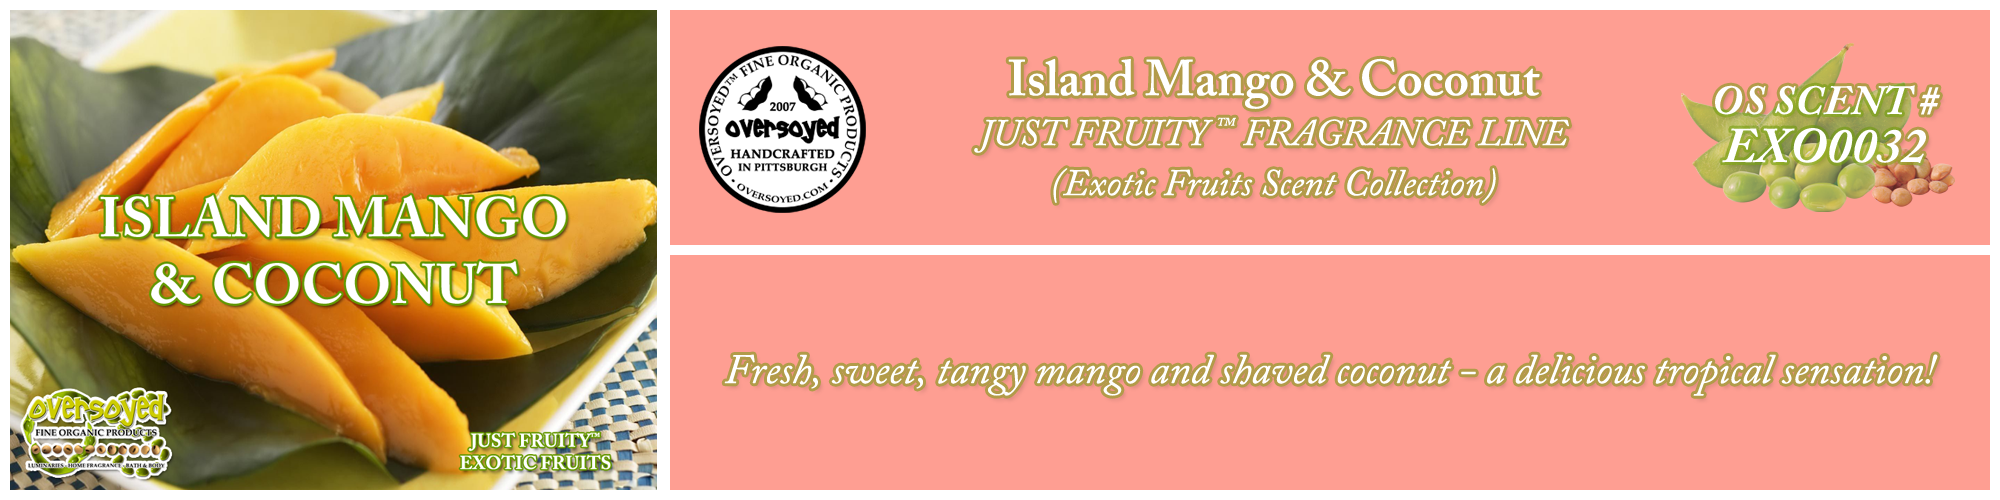 Island Mango & Coconut Handcrafted Products Collection